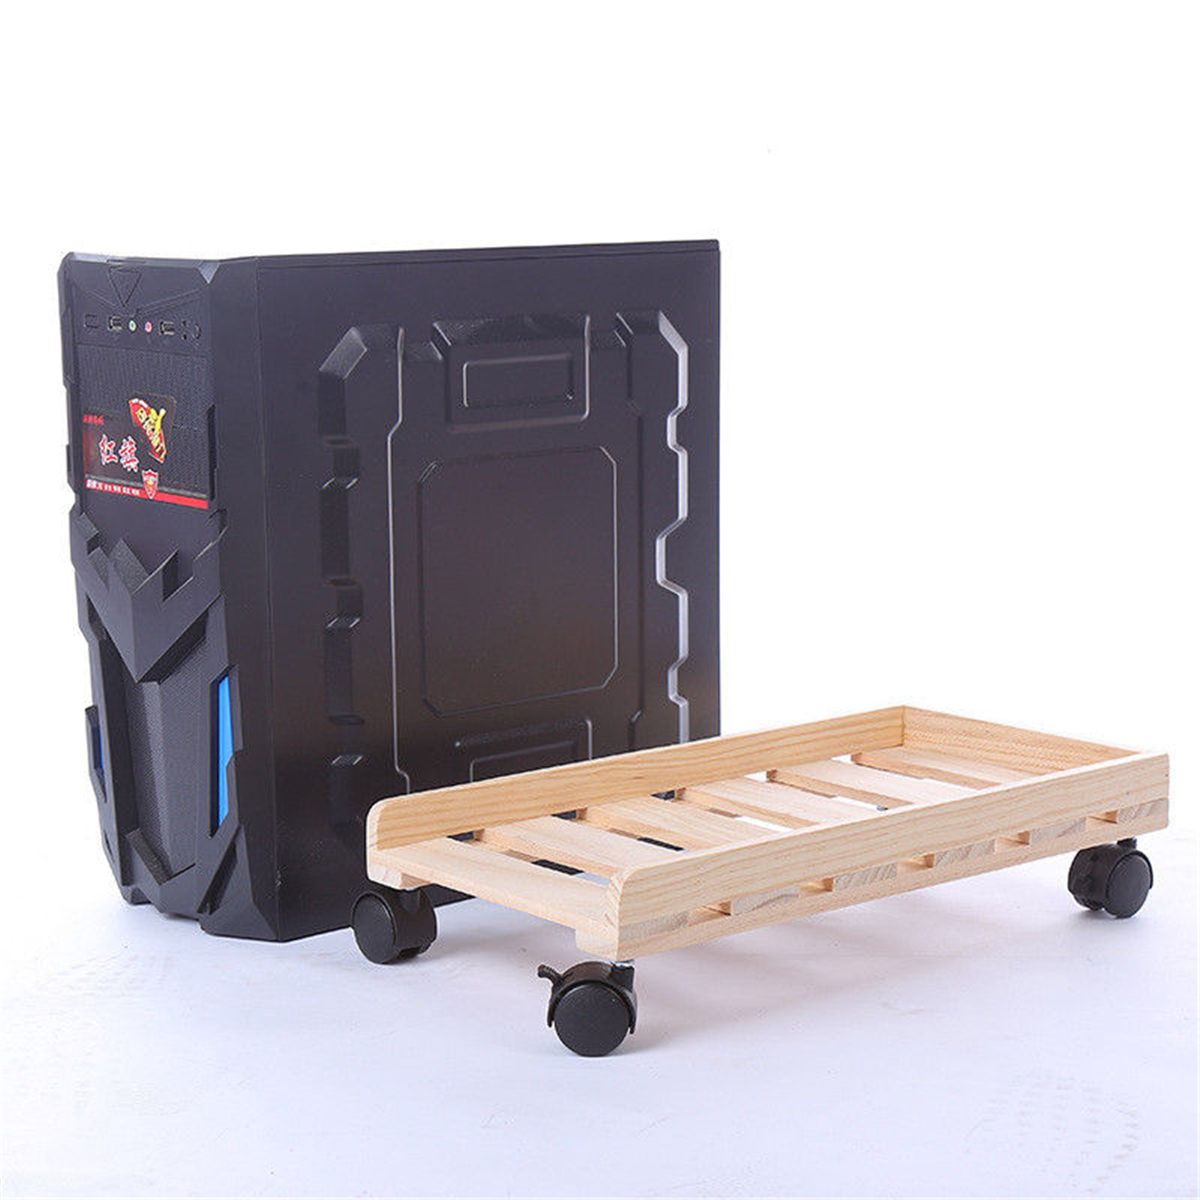 H-type-Four-Wheel-Thickening-Wood-Computer-Case-Host-Moving-Bracket-Adjustable-CPU-Stand-1528290